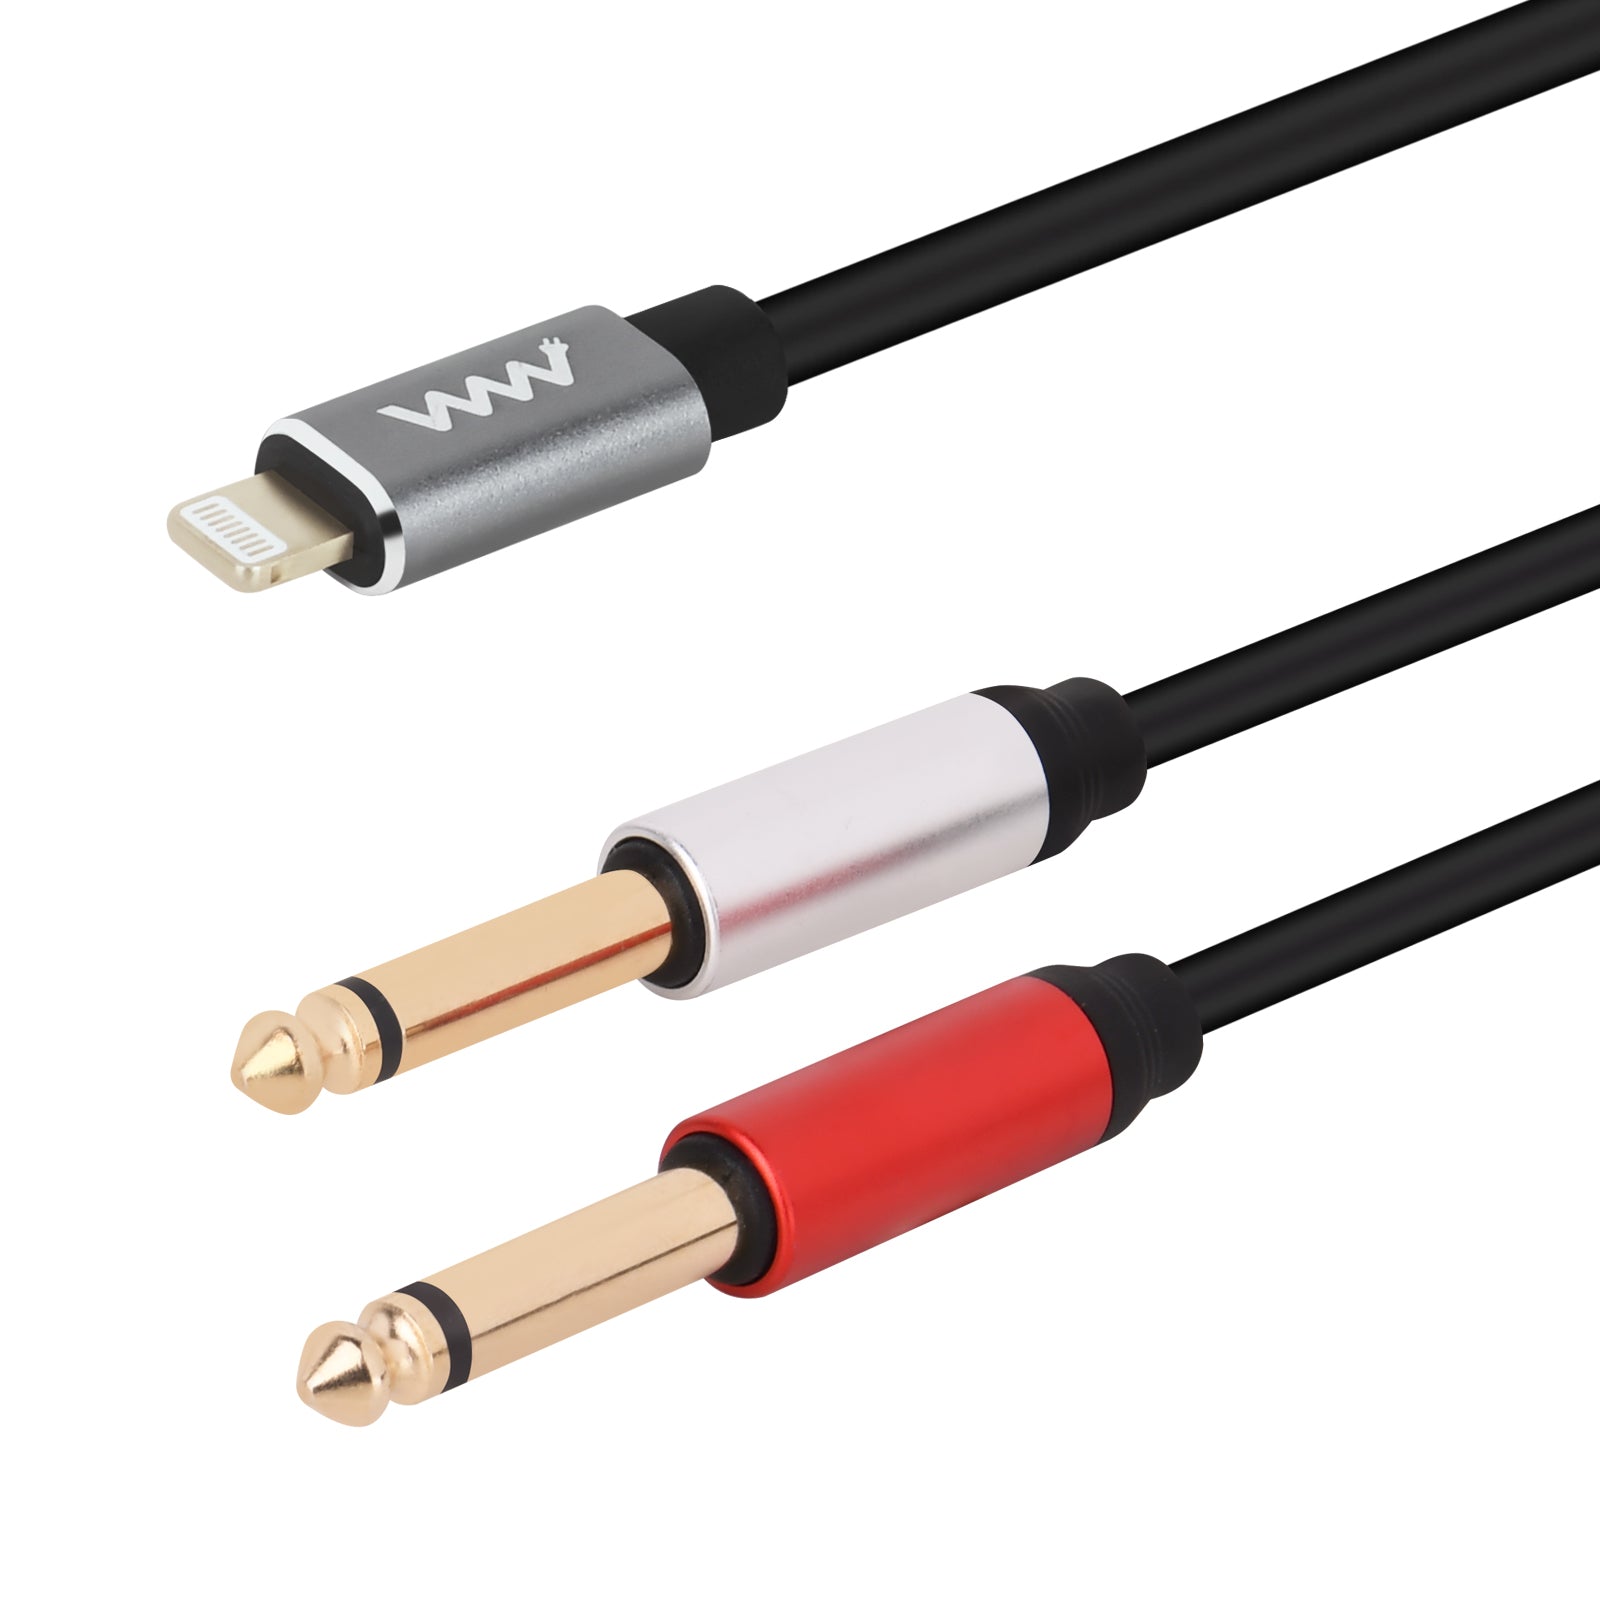 8 Pin to Dual 6.35mm Audio Cable For Amplifier Mixing iPhone iPad 3m